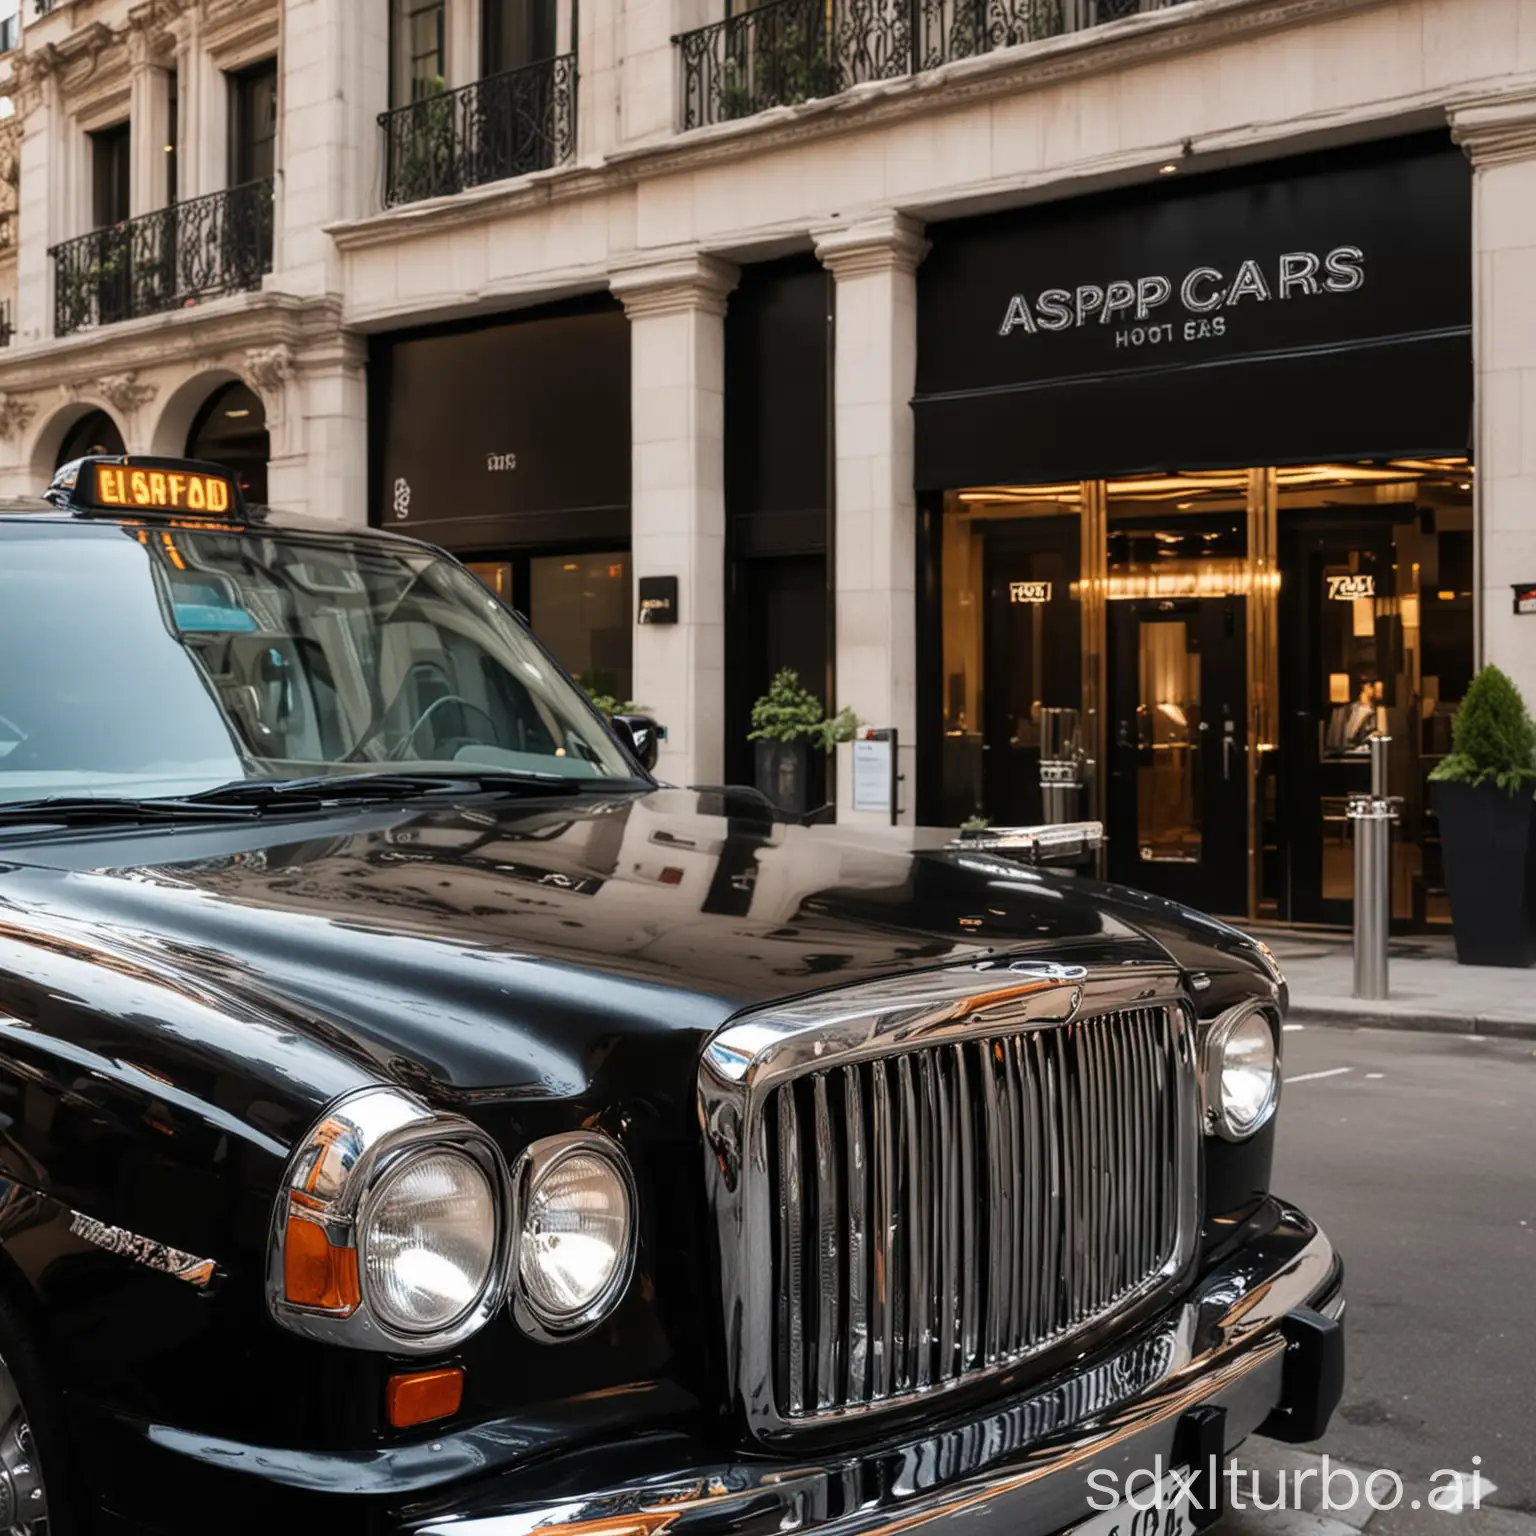 A black taxi cab is parked in front of a luxurious hotel. The taxi is clean and well-maintained, with a shiny black paint job and polished chrome accents. A sign that says "ASAP CARS" is resting on the hood of the taxi.
